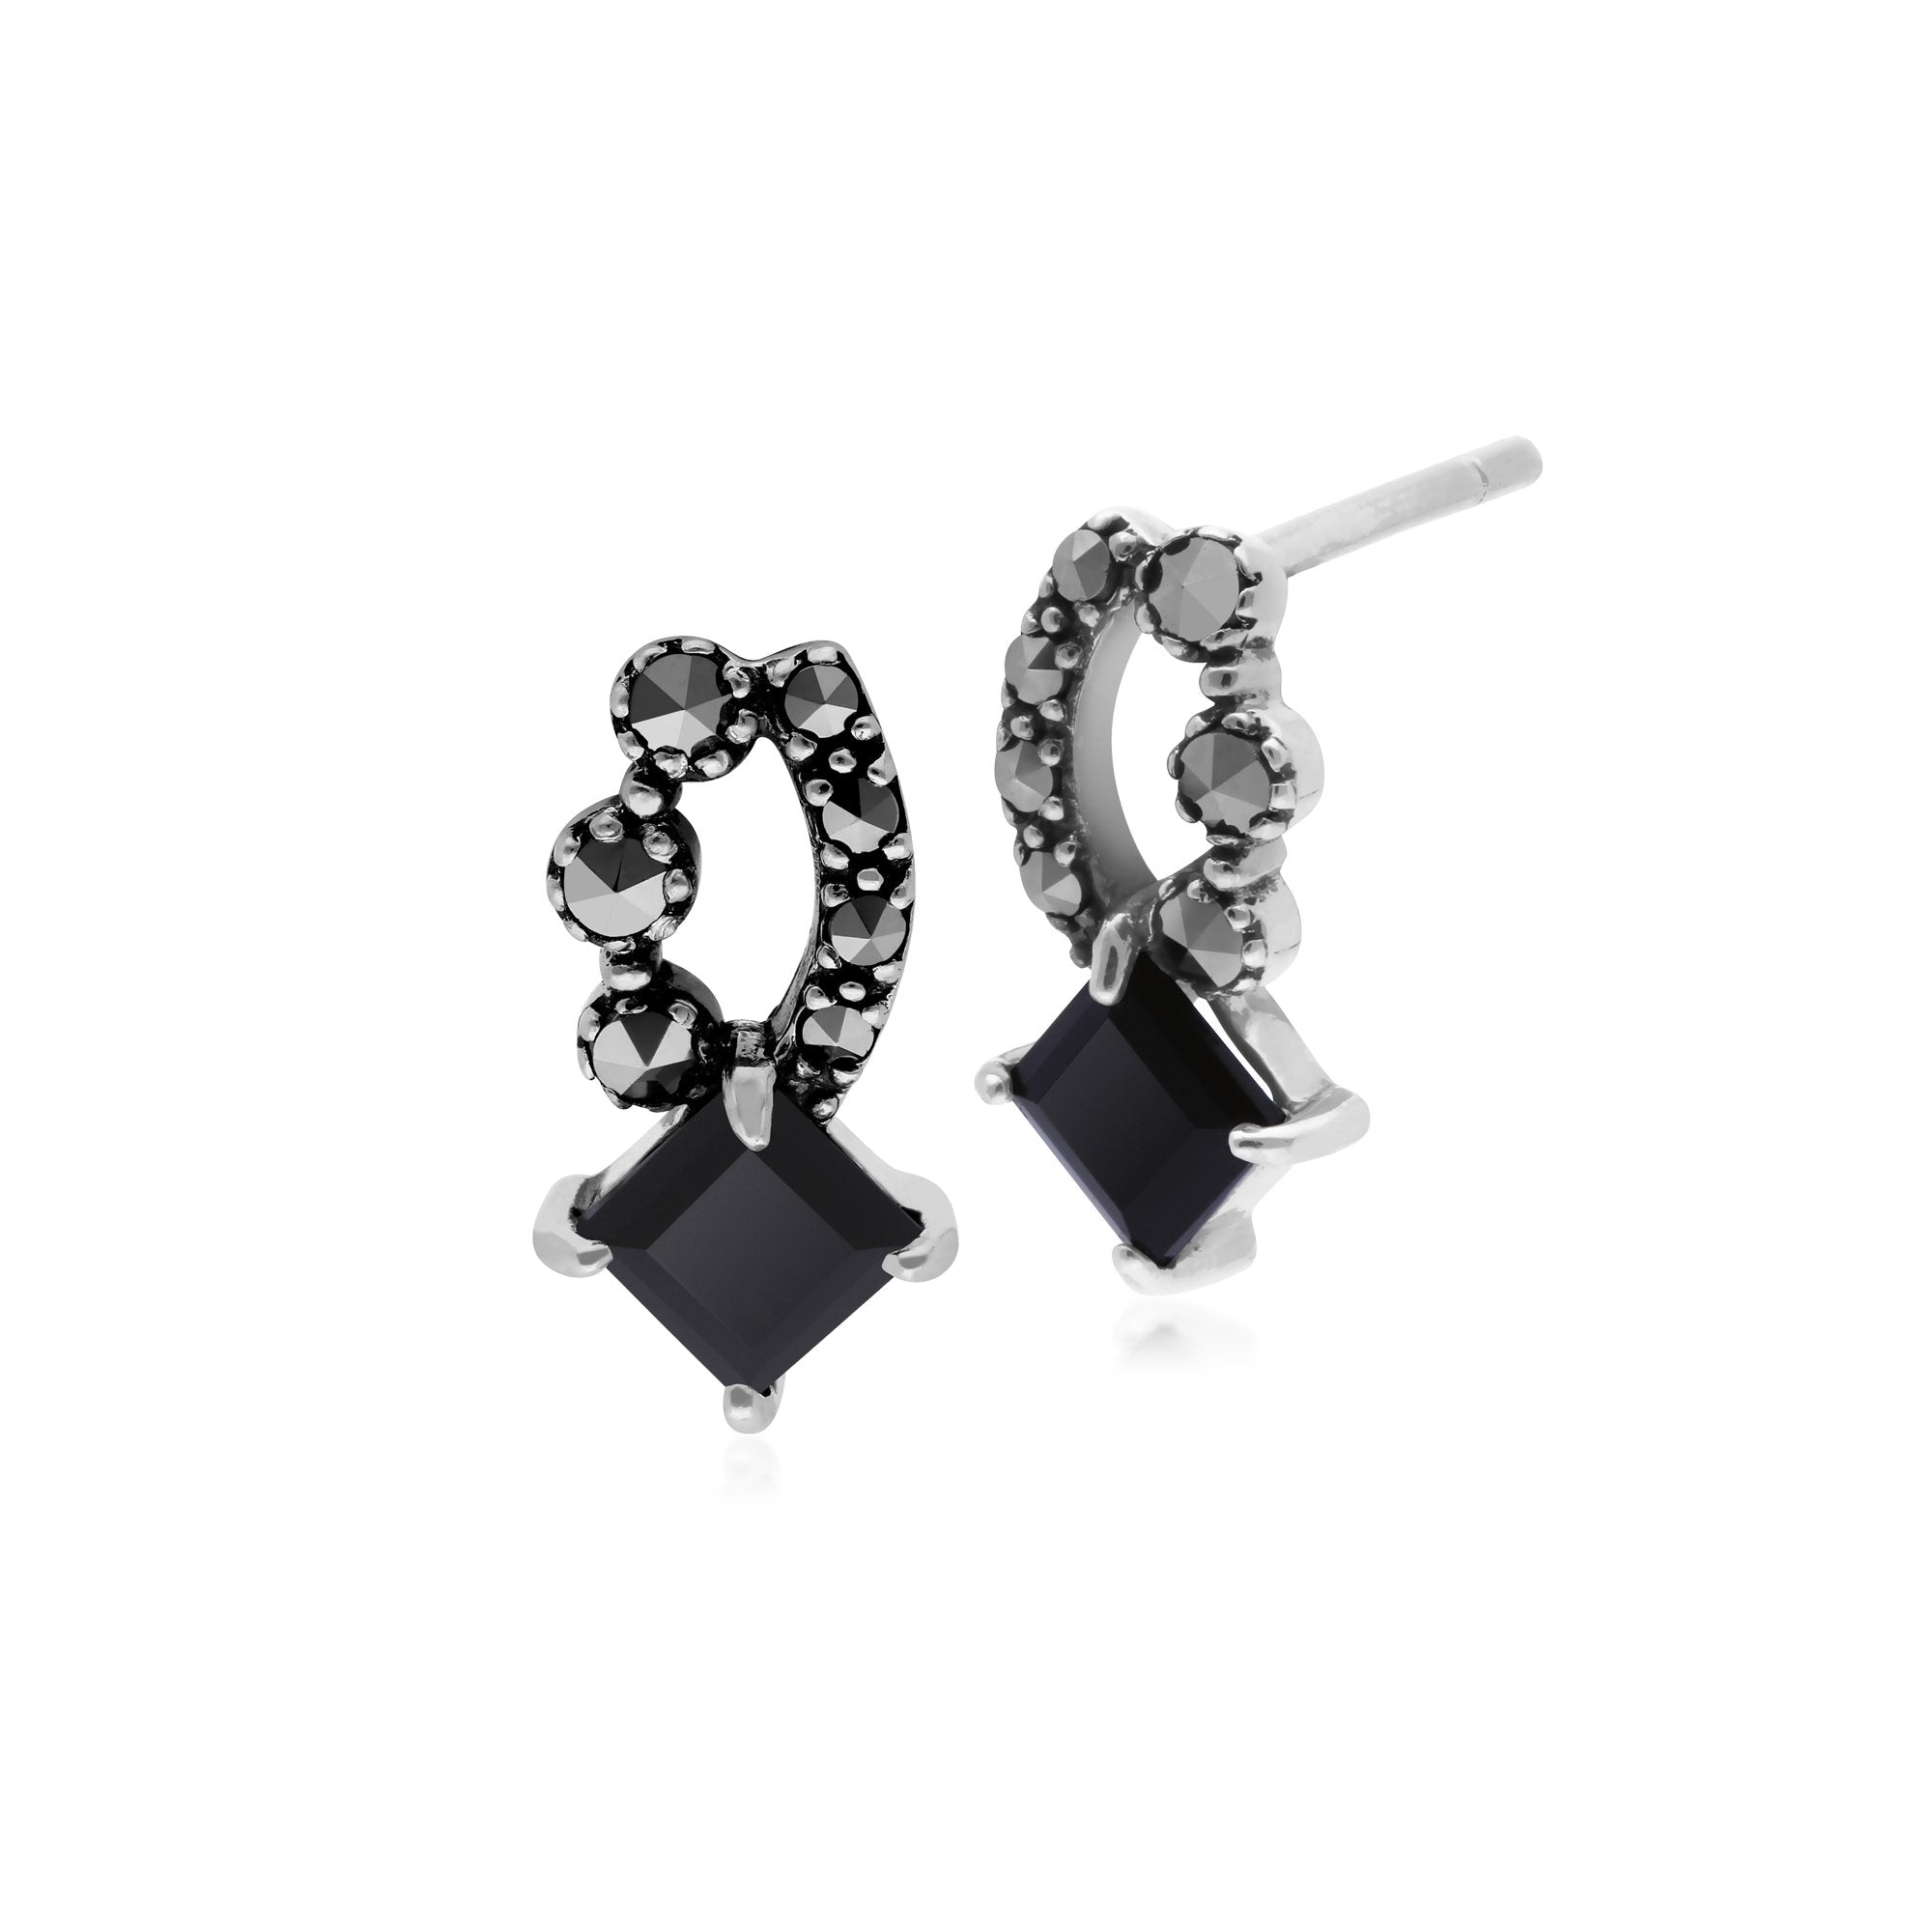 Art Nouveau Style Square Black Onyx  & Marcasite Stud Earrings in 925 Sterling Silver 